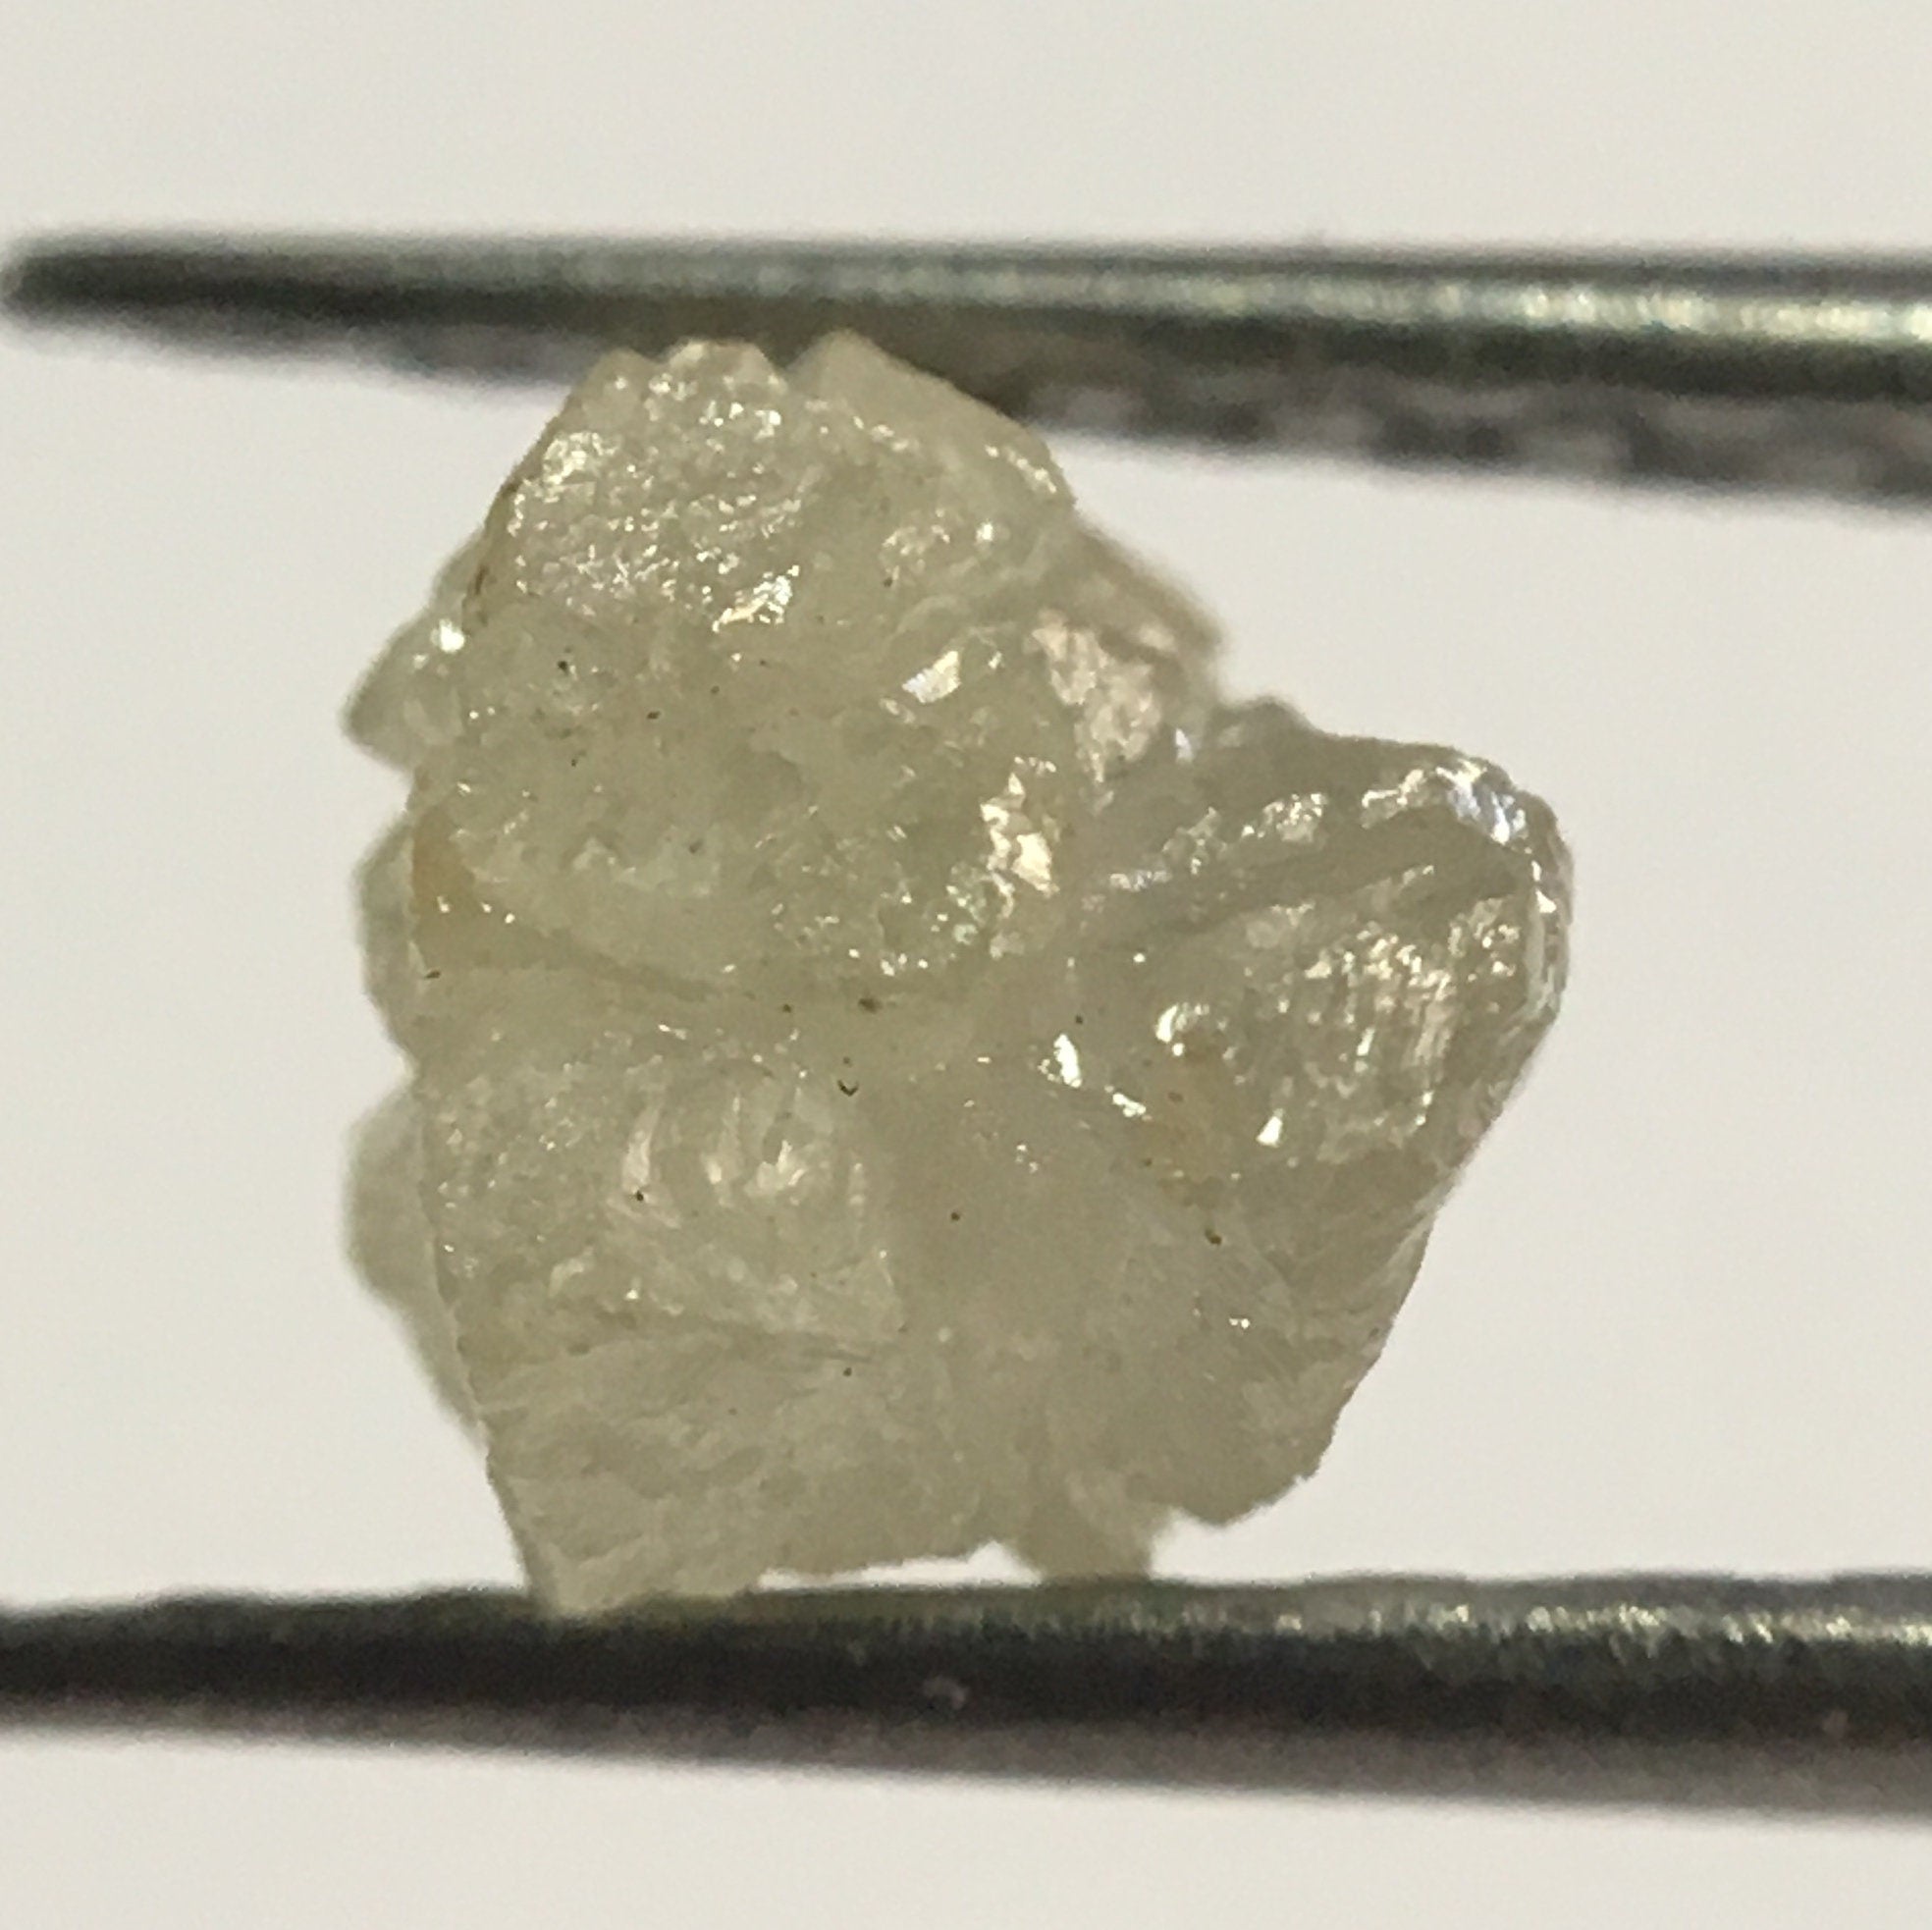 0.79 Ct Natural Raw Rough Uncut Loose Diamond Grey Color, 5.45 mm x 5.25 mm Raw Diamond Crystal Earth Mined Origin South Africa SJ24/12